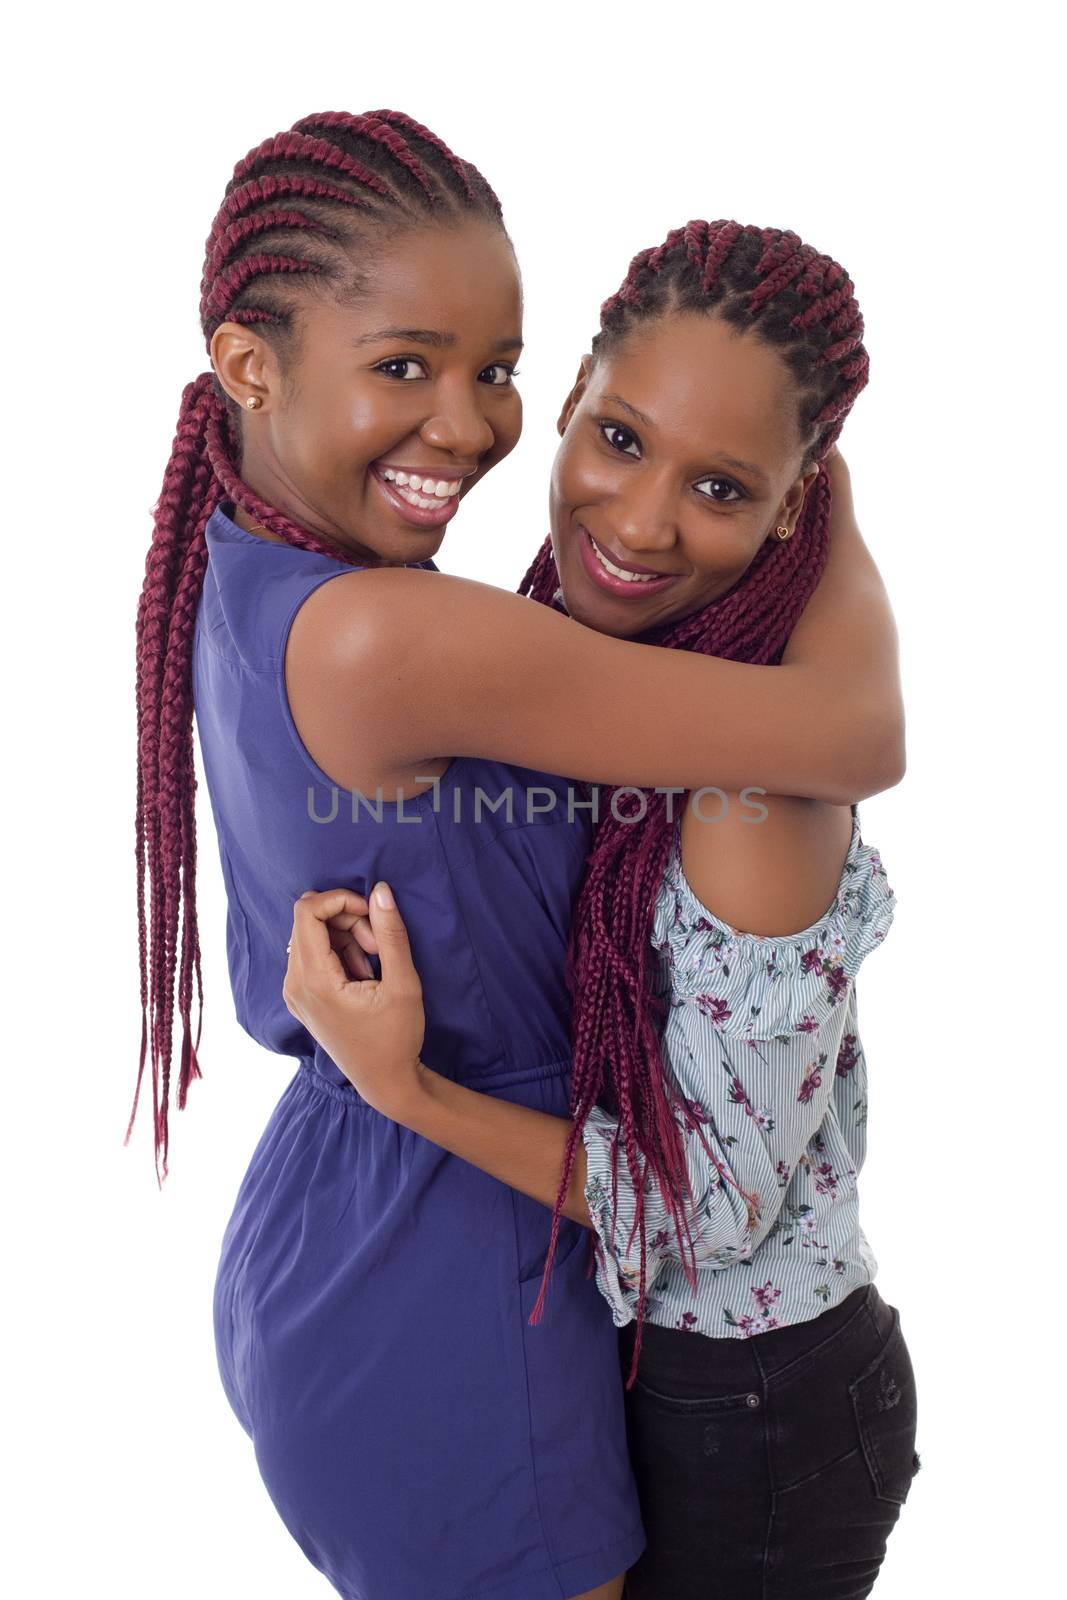 casual happy african girls, isolated on white background